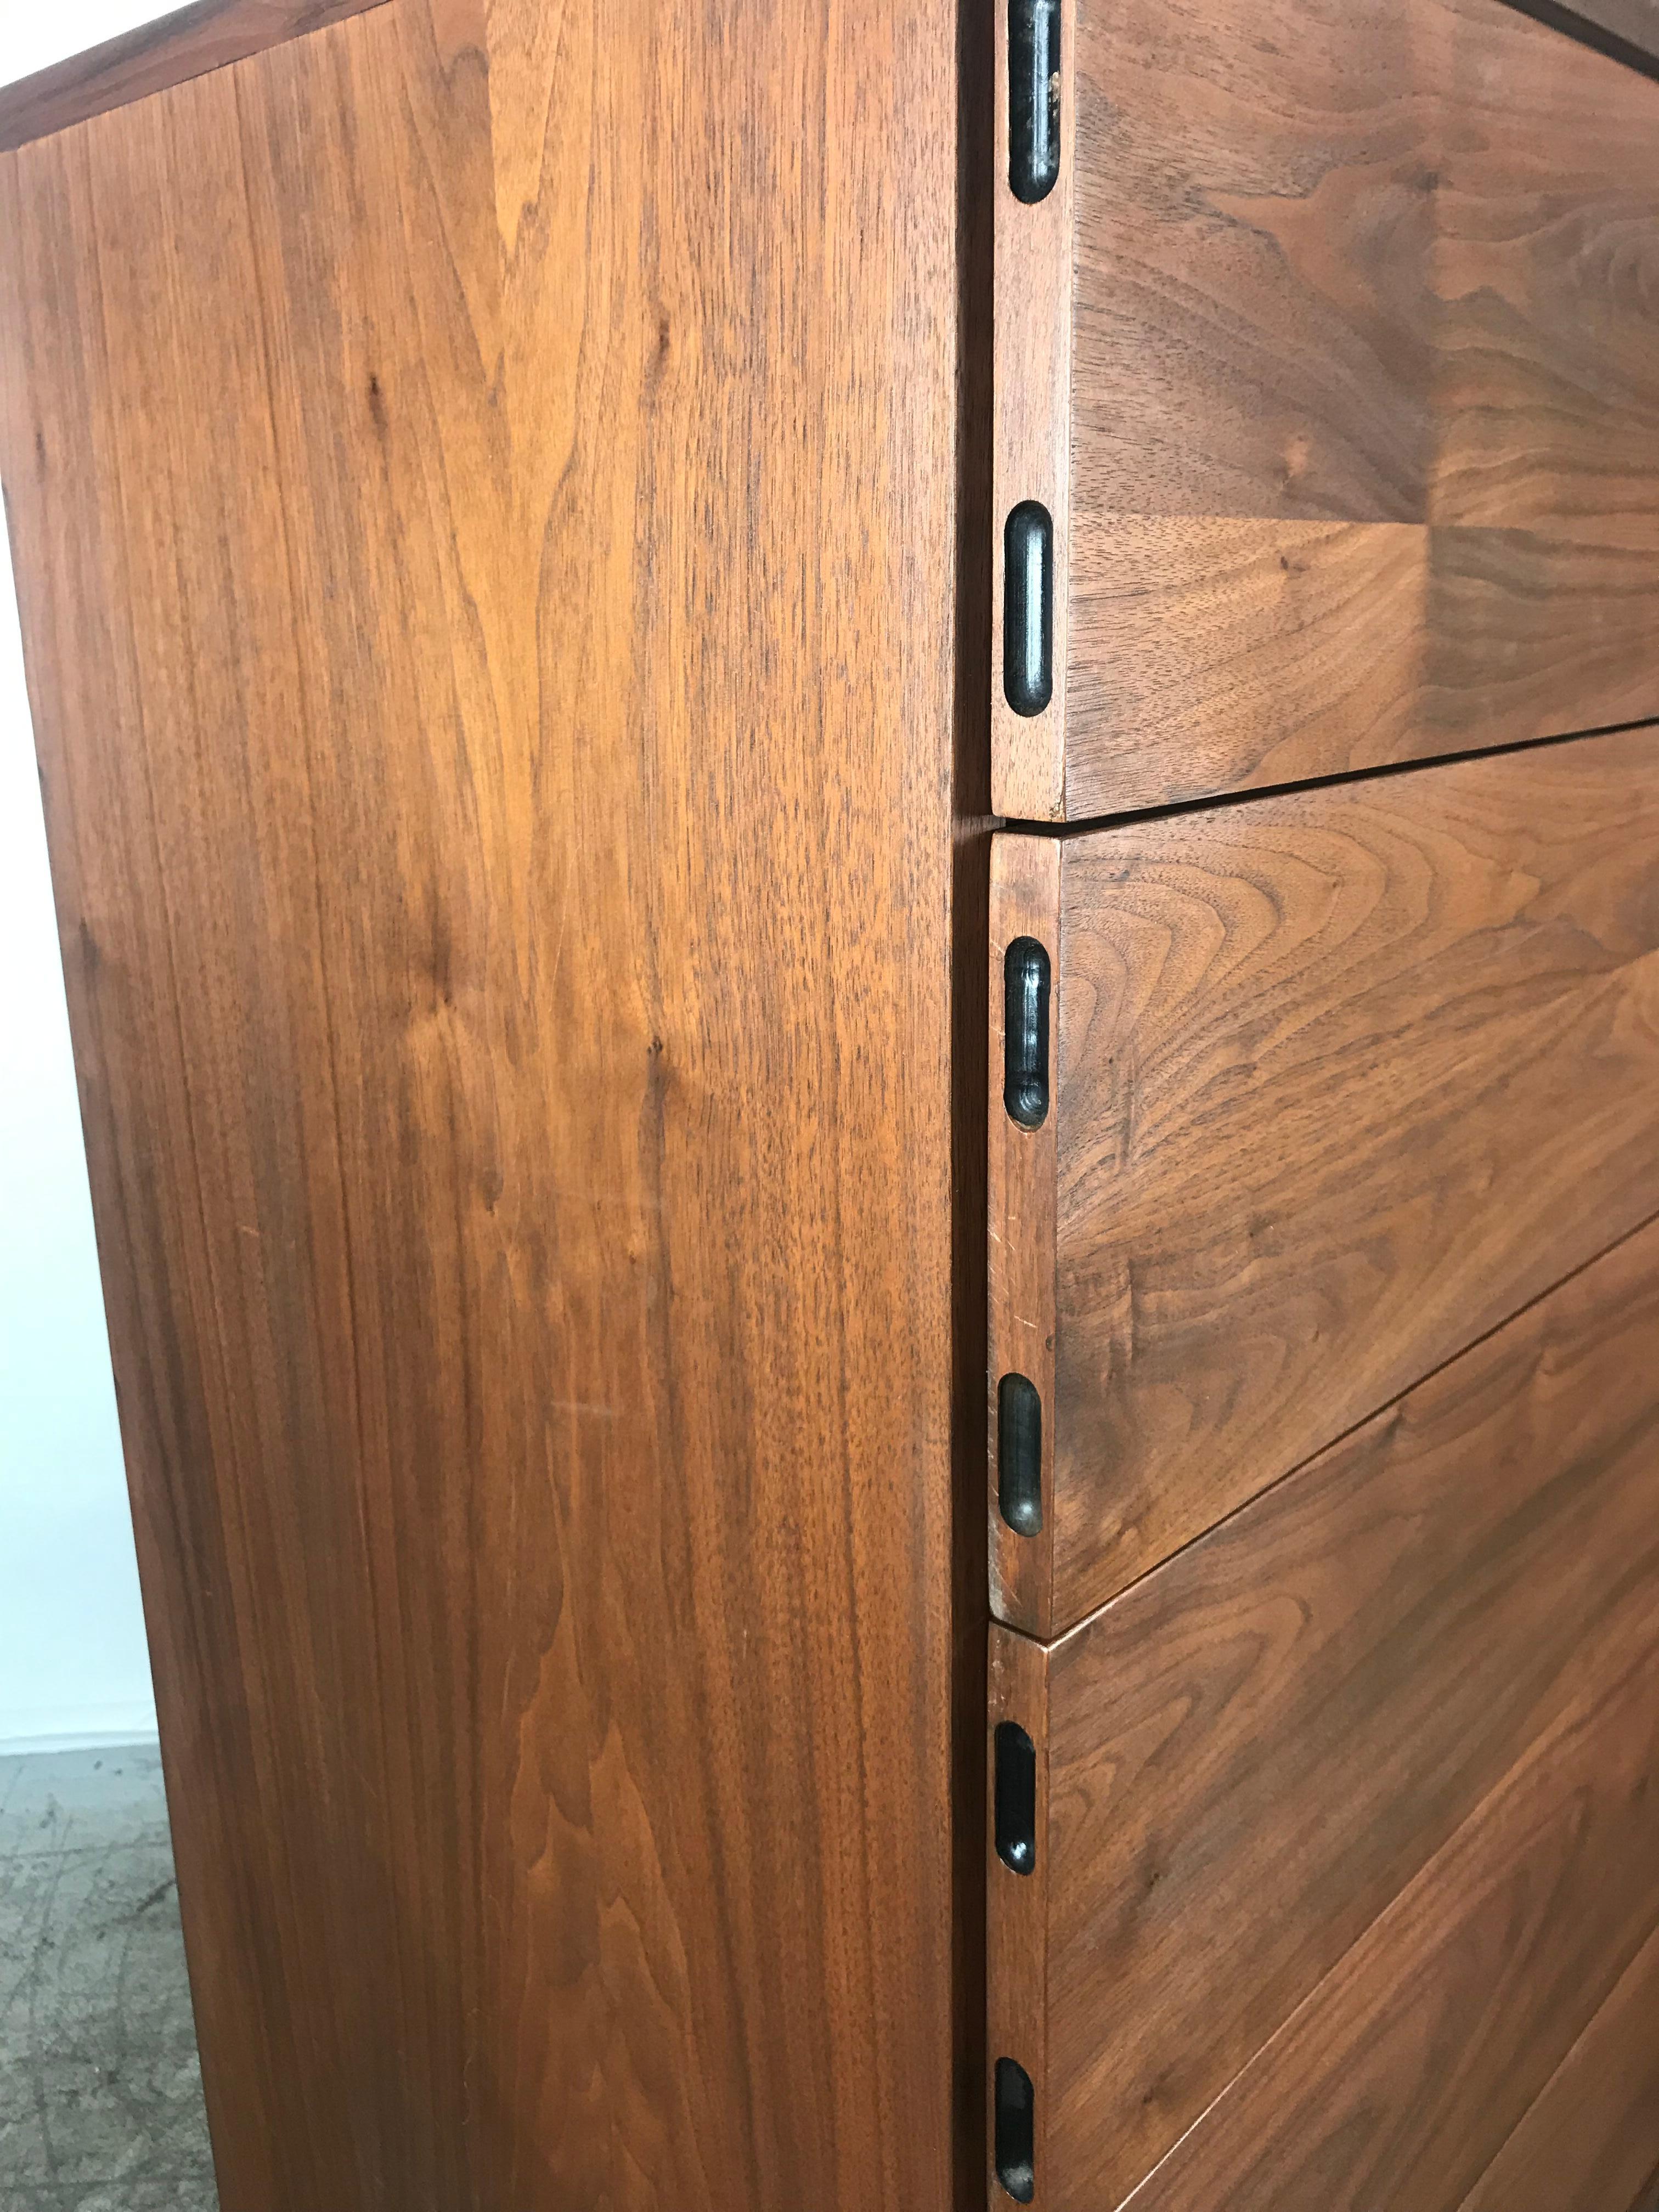 Sleek, simple, elegant Mid-Century Modern custom designed and built gentleman's chest or dresser, features beautiful walnut wood, unusual side pulls which enhances design, 5 generous drawers (left), cubby storage (right) with top trinket drawer,